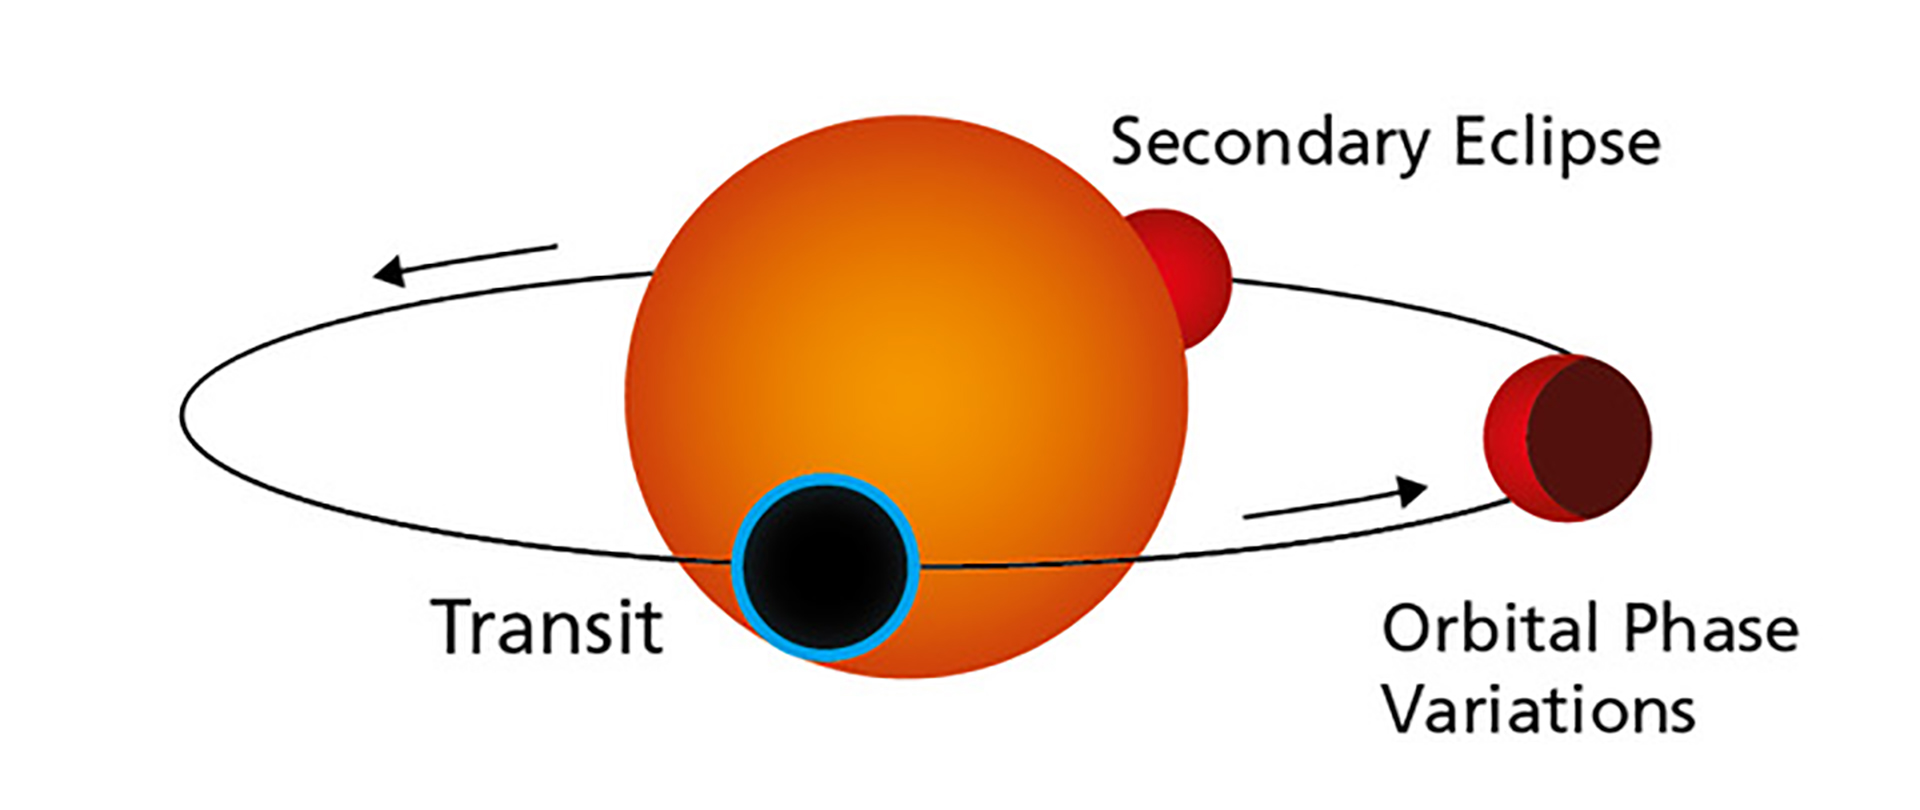 The graph illustrates the orbit of a transiting rocky exoplanet like Gliese 486b around its host star. During the transit, the planet eclipses the stellar disk. Simultaneously, a small portion of the starlight passes through the planet's atmosphere. As Gliese 486b continues to orbit, parts of the illuminated hemisphere become visible as phases until the planet disappears behind the star. Credit: MPIA Graphics Department.